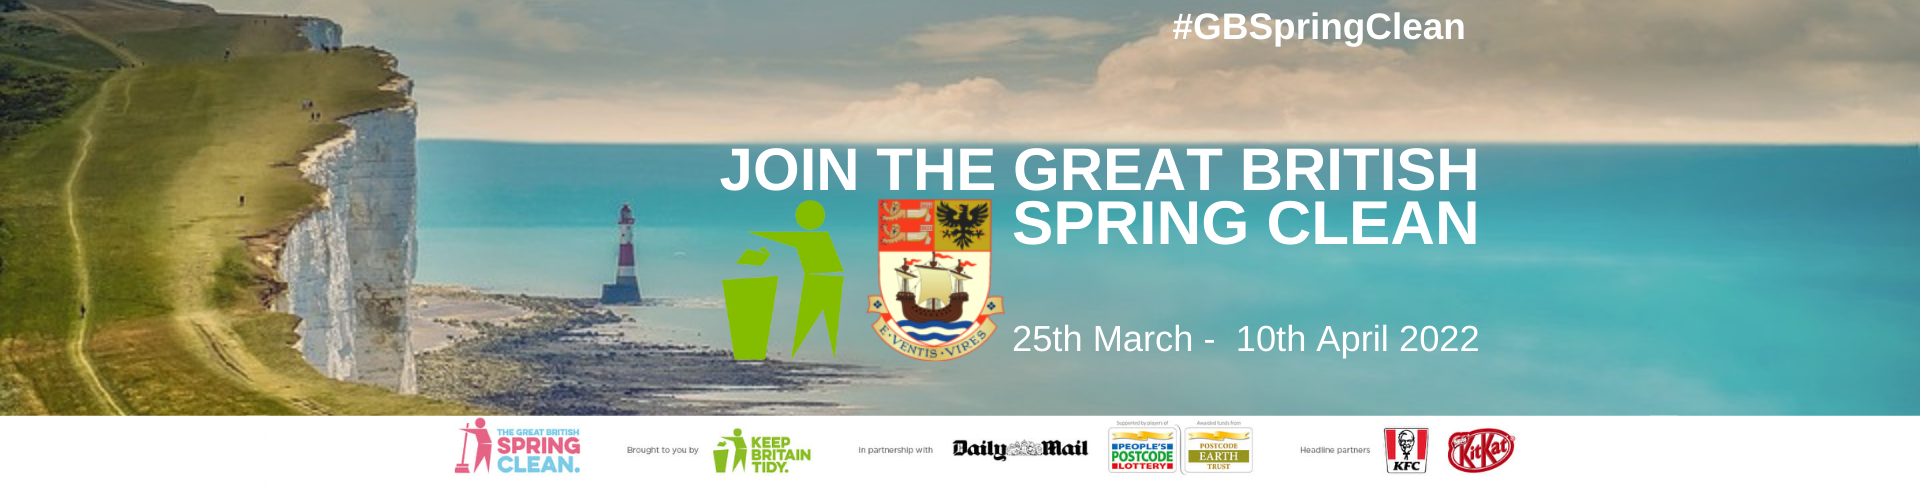 Seaford pledges to join the Great British Spring Clean Campaign on 25th March to 10th April 2022